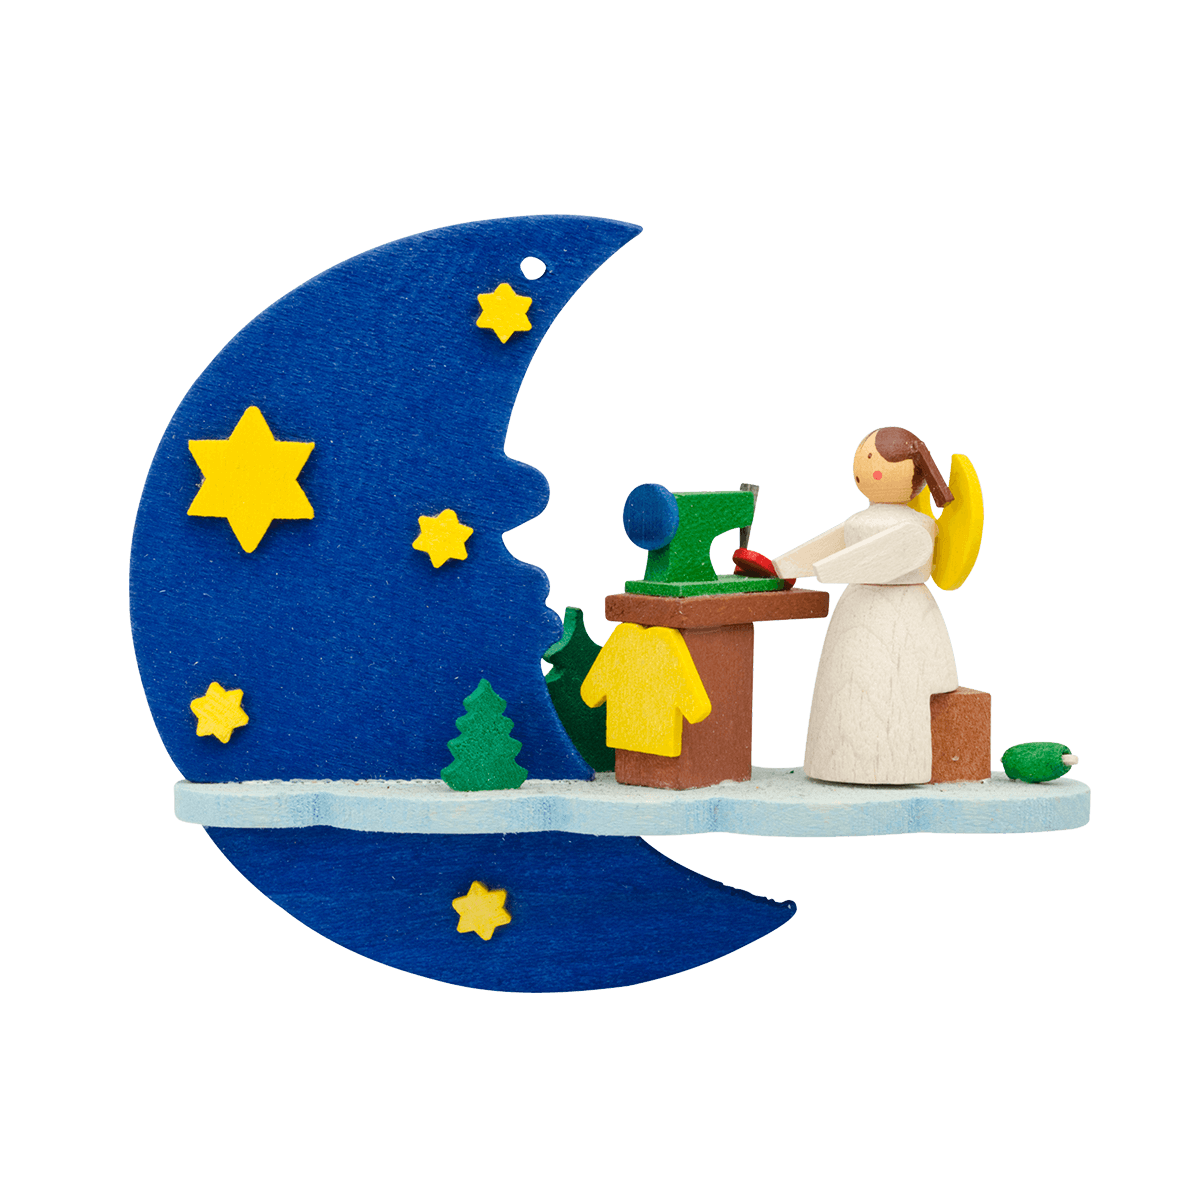 Angel on Moon with Sewing Machine Ornament by Graupner Holzminiaturen